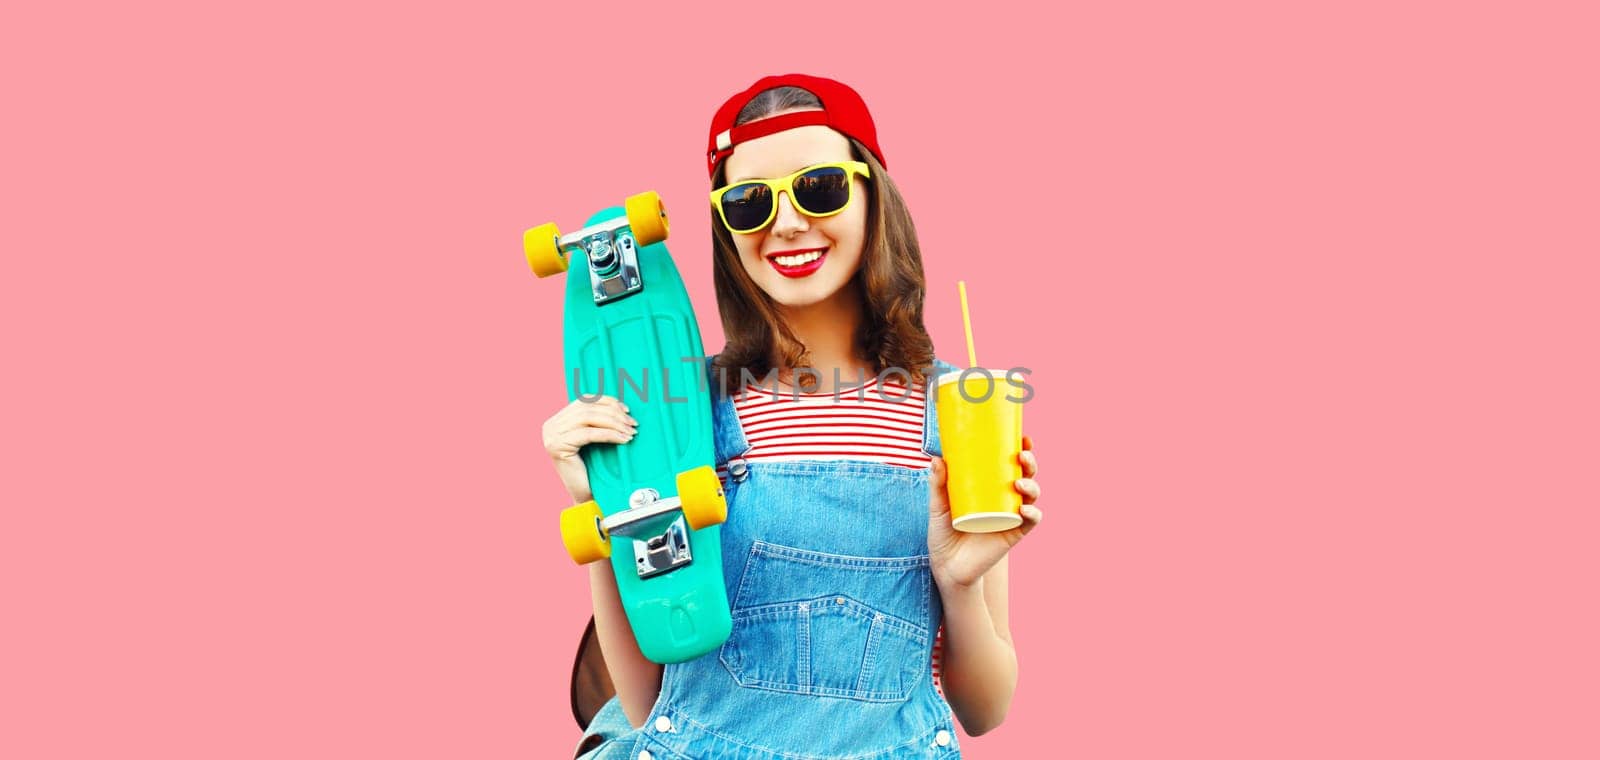 Portrait of happy smiling young woman with skateboard and cup of juice wearing red baseball cap, sunglasses on pink background